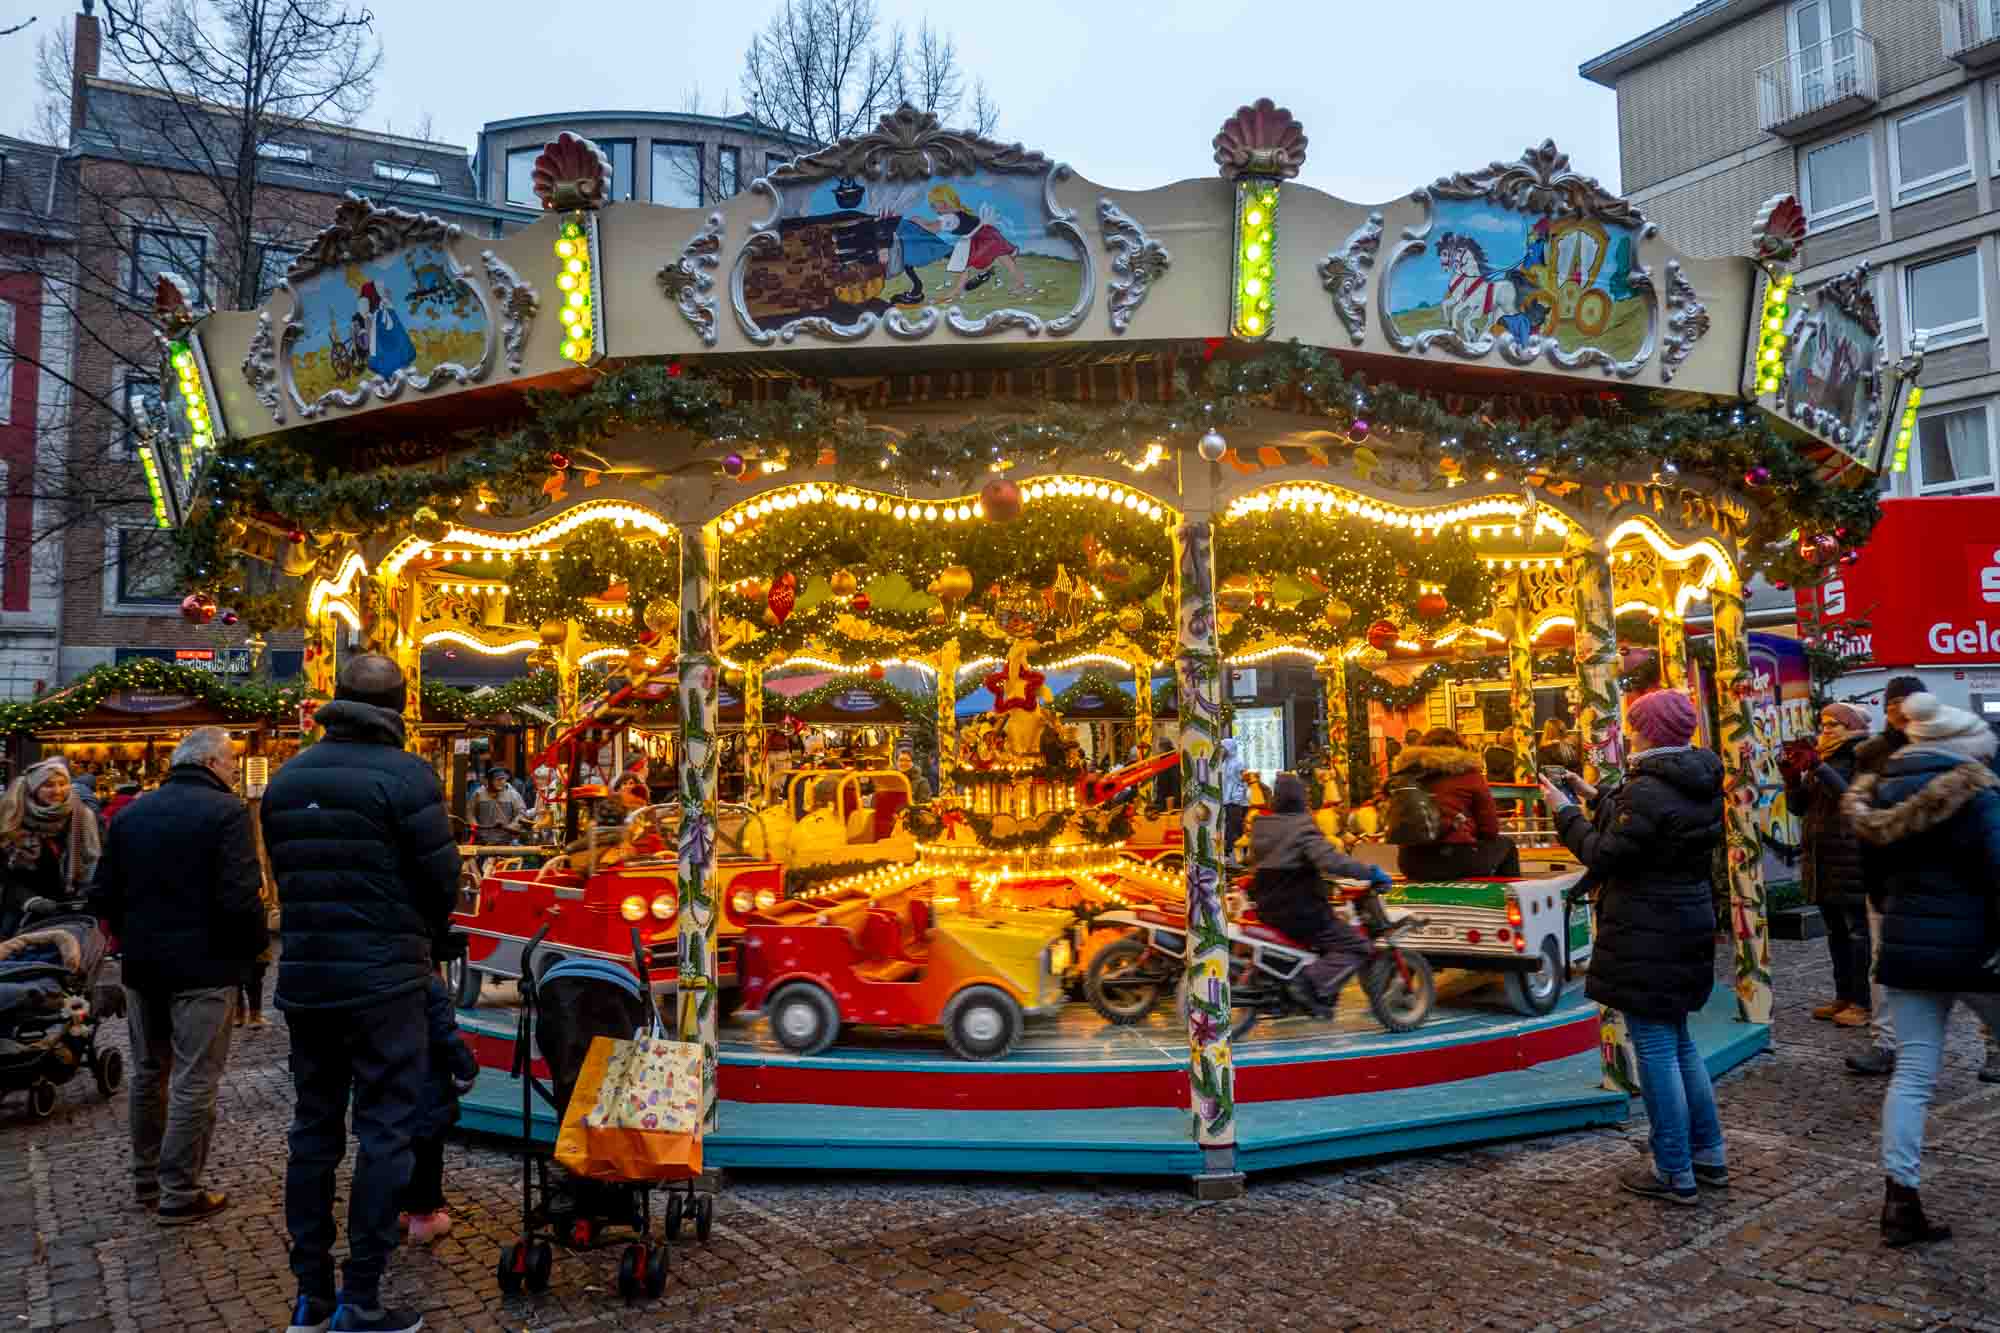 Children riding a carousel decorated with lights and holiday garland